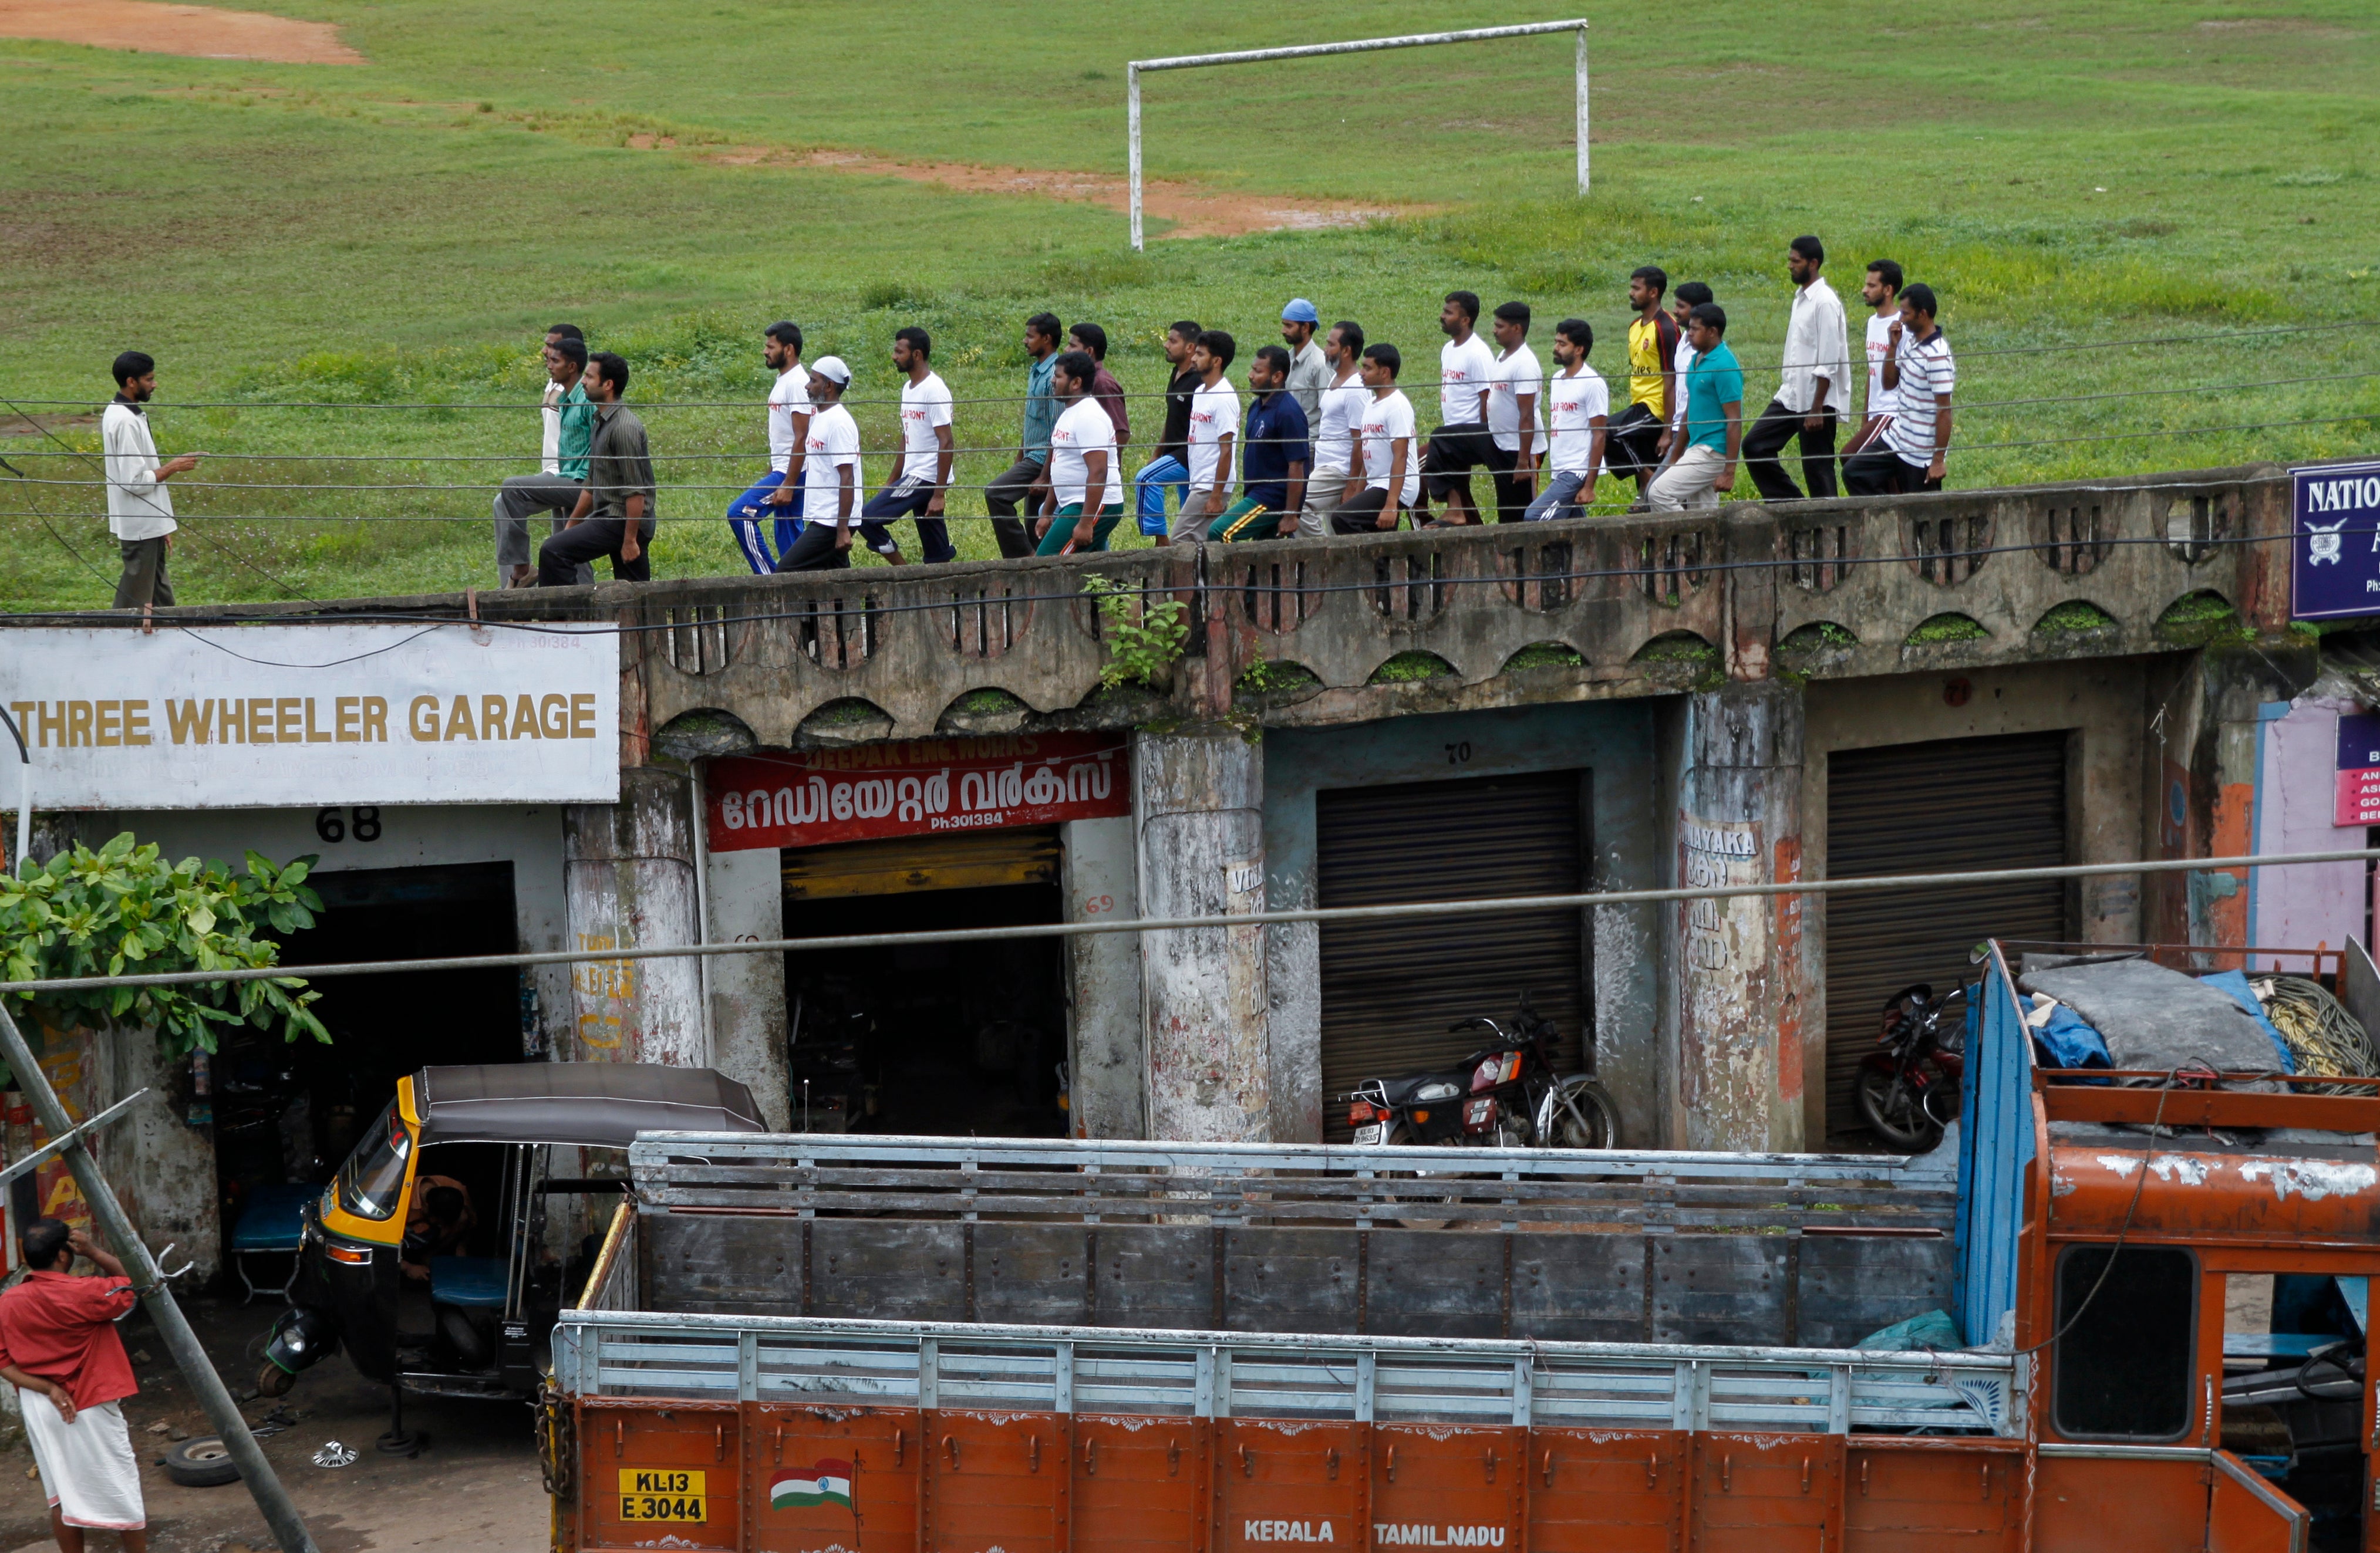 Members of the Muslim organization Popular Front of India (PFI) undergo parade training at a football ground in Kottayam, southern Kerala state, India, 27 June 2010